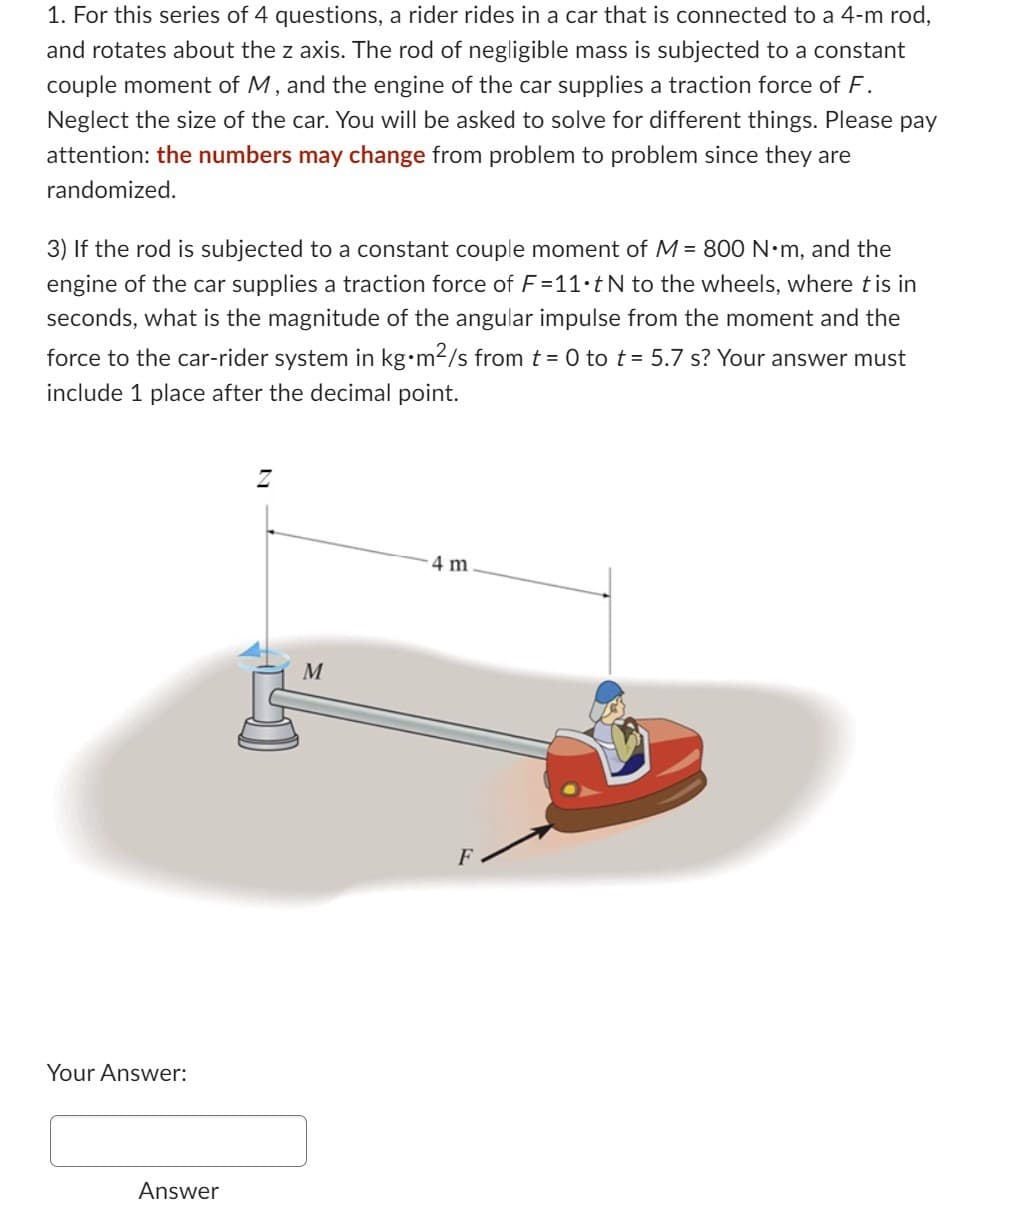 1. For this series of 4 questions, a rider rides in a car that is connected to a 4-m rod,
and rotates about the z axis. The rod of negligible mass is subjected to a constant
couple moment of M, and the engine of the car supplies a traction force of F.
Neglect the size of the car. You will be asked to solve for different things. Please pay
attention: the numbers may change from problem to problem since they are
randomized.
3) If the rod is subjected to a constant couple moment of M = 800 N•m, and the
engine of the car supplies a traction force of F=11•t N to the wheels, where tis in
seconds, what is the magnitude of the angular impulse from the moment and the
force to the car-rider system in kg•m²/s from t = 0 to t = 5.7 s? Your answer must
include 1 place after the decimal point.
Your Answer:
Answer
M
4 m
F